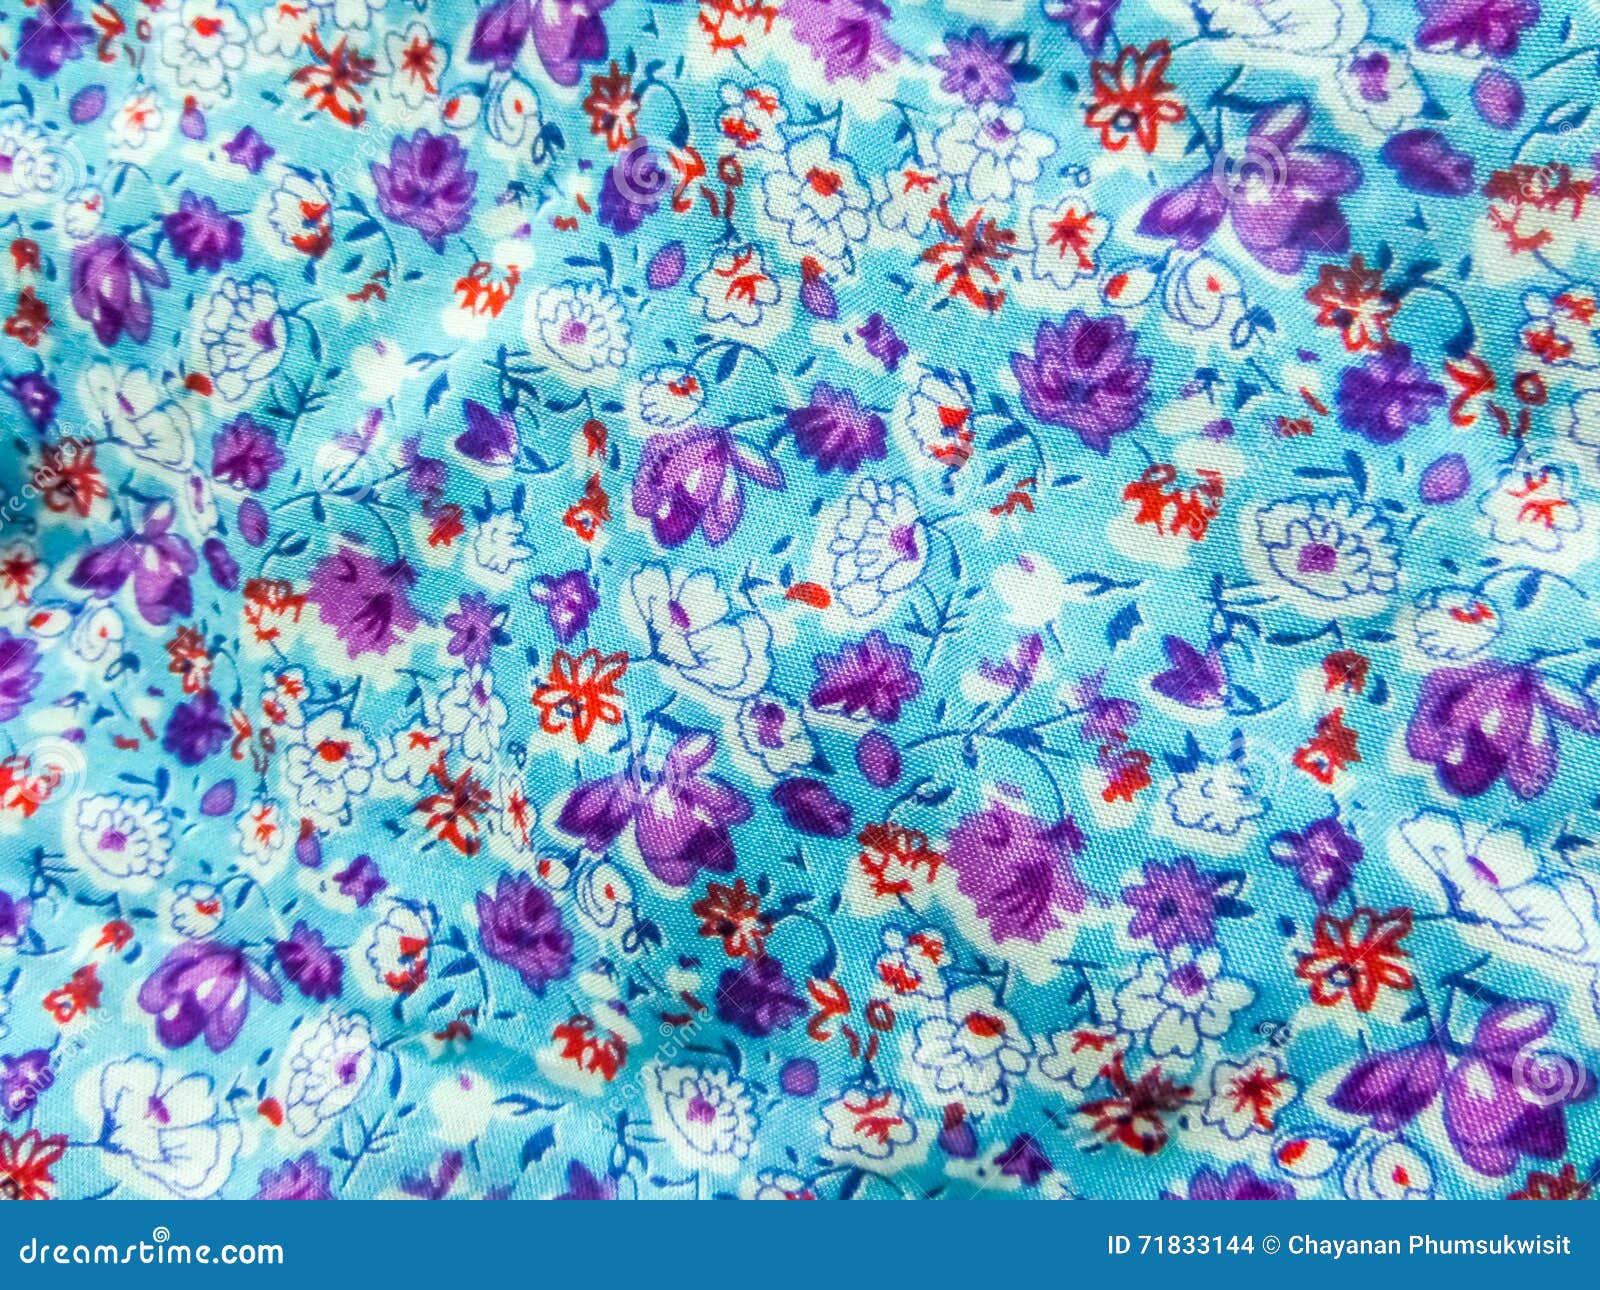 Art on Baby Cloth and Ware Flower Flora Blue Stock Photo - Image of ...